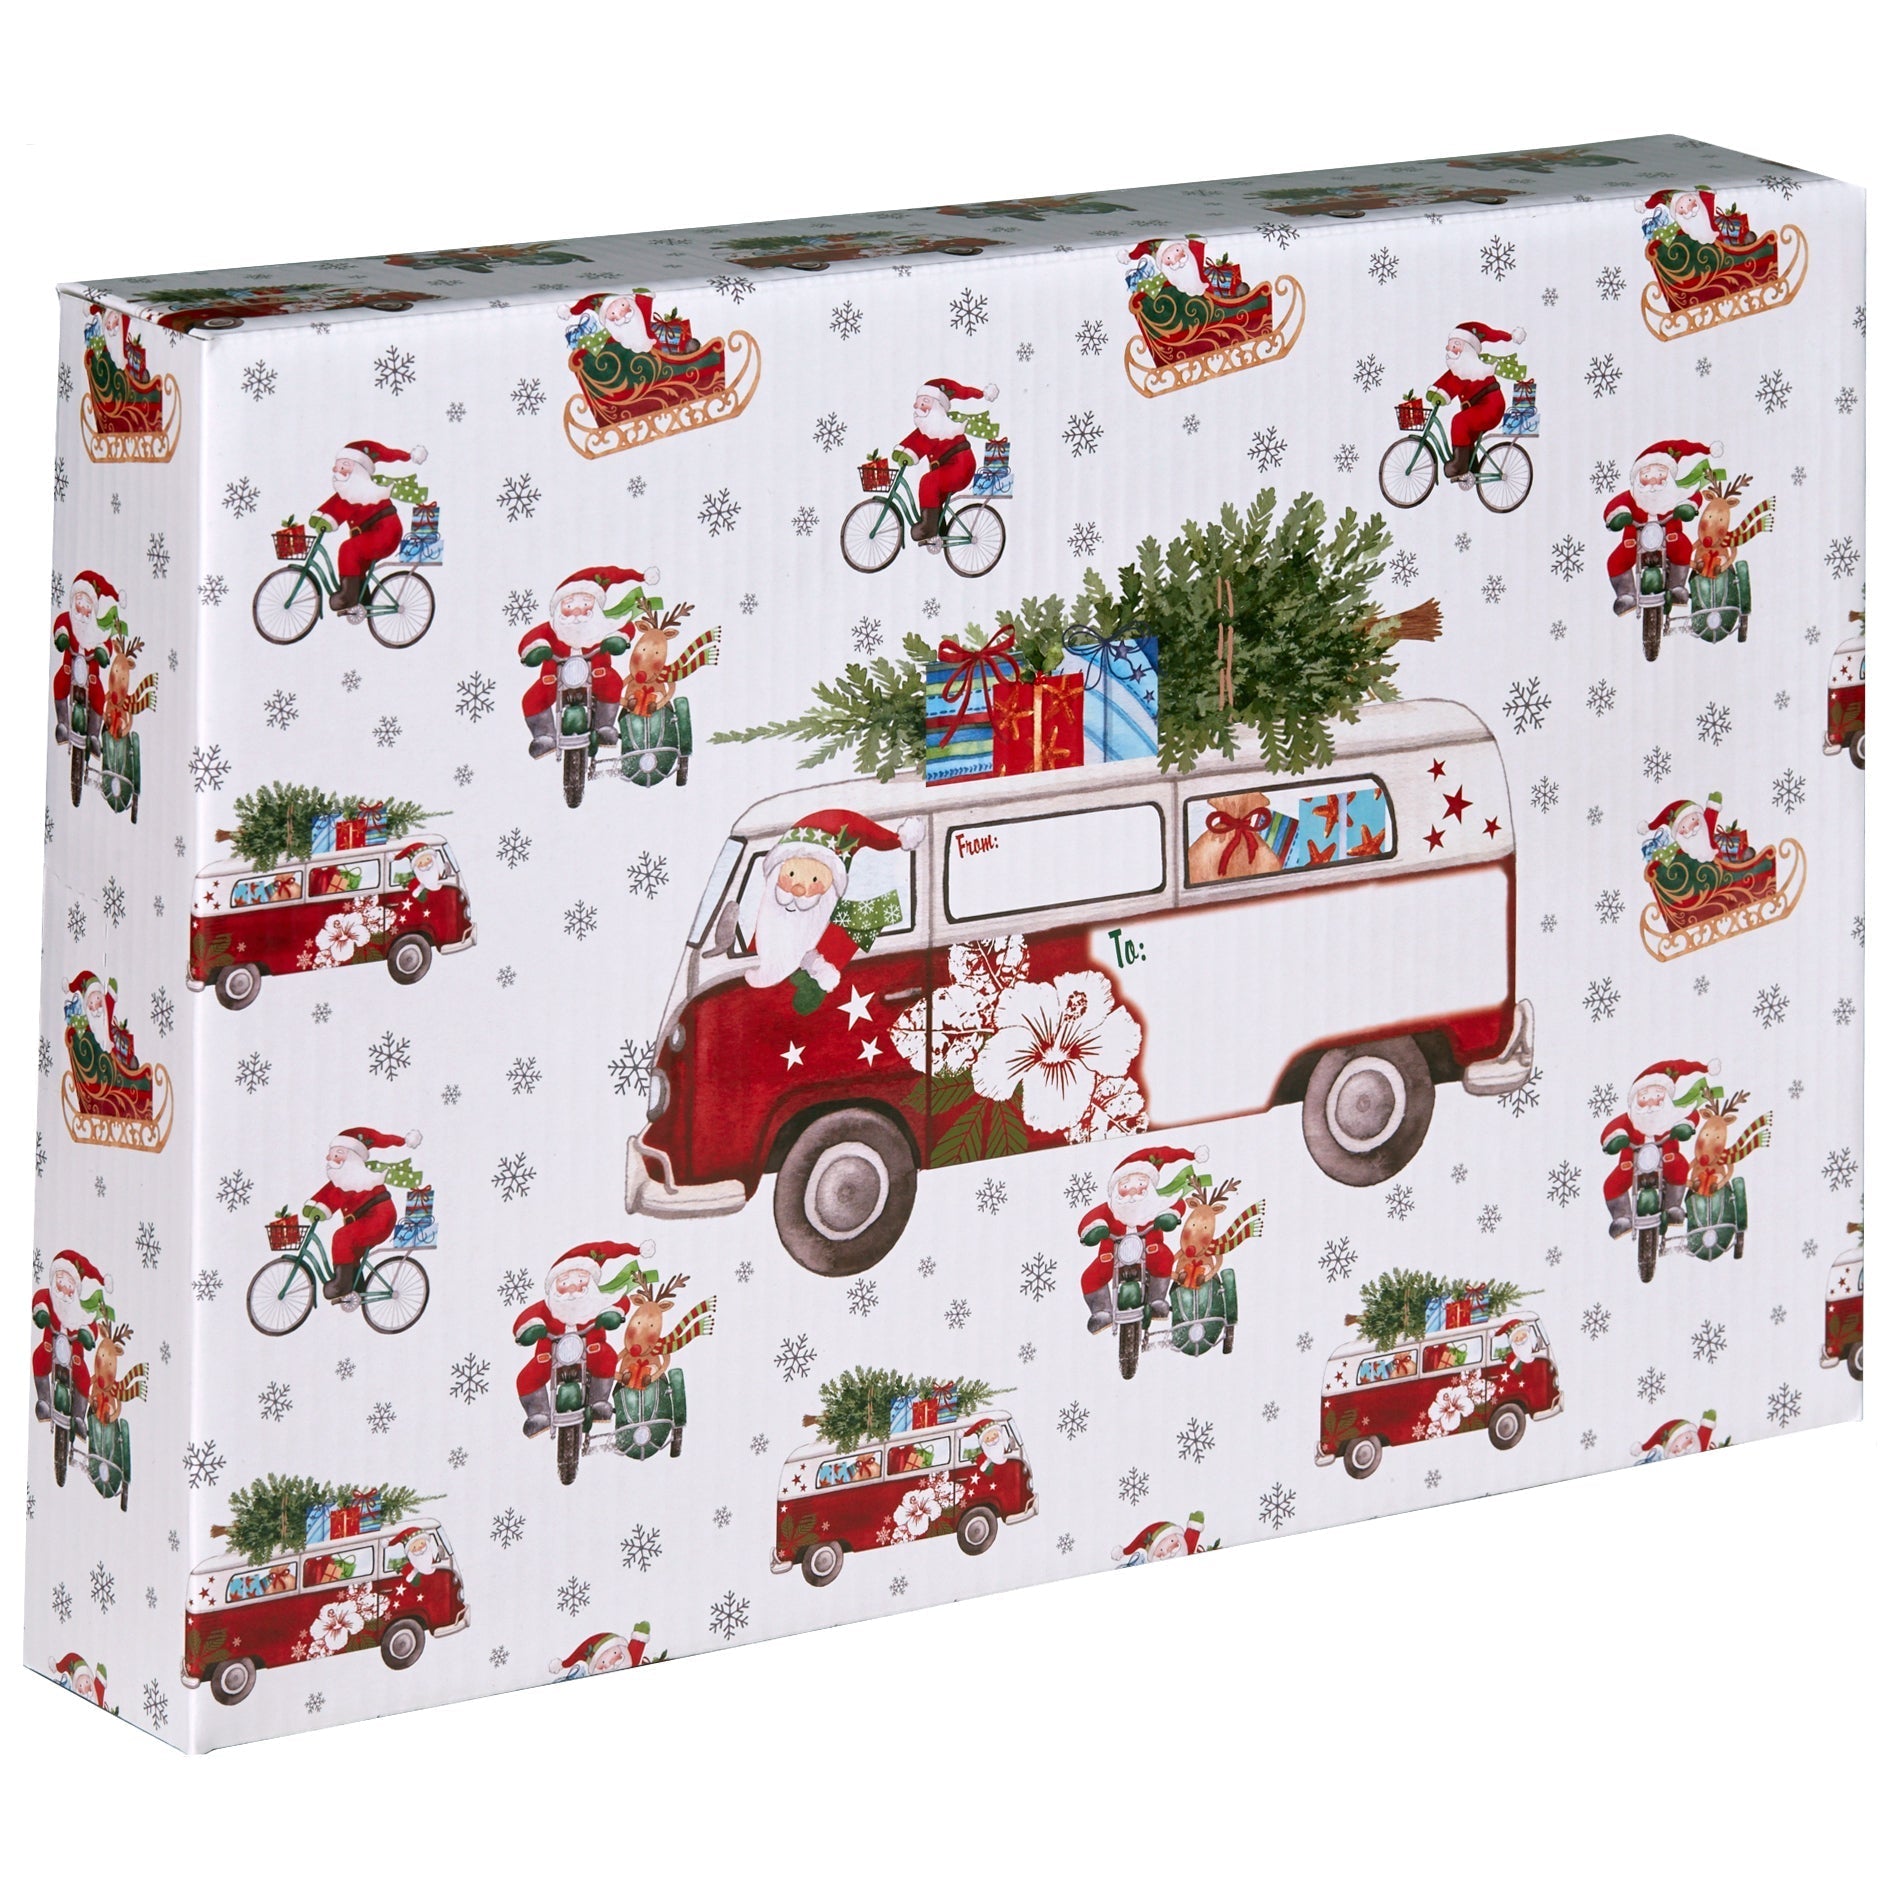 Out for Delivery Large Christmas Printed Gift Mailing Boxes